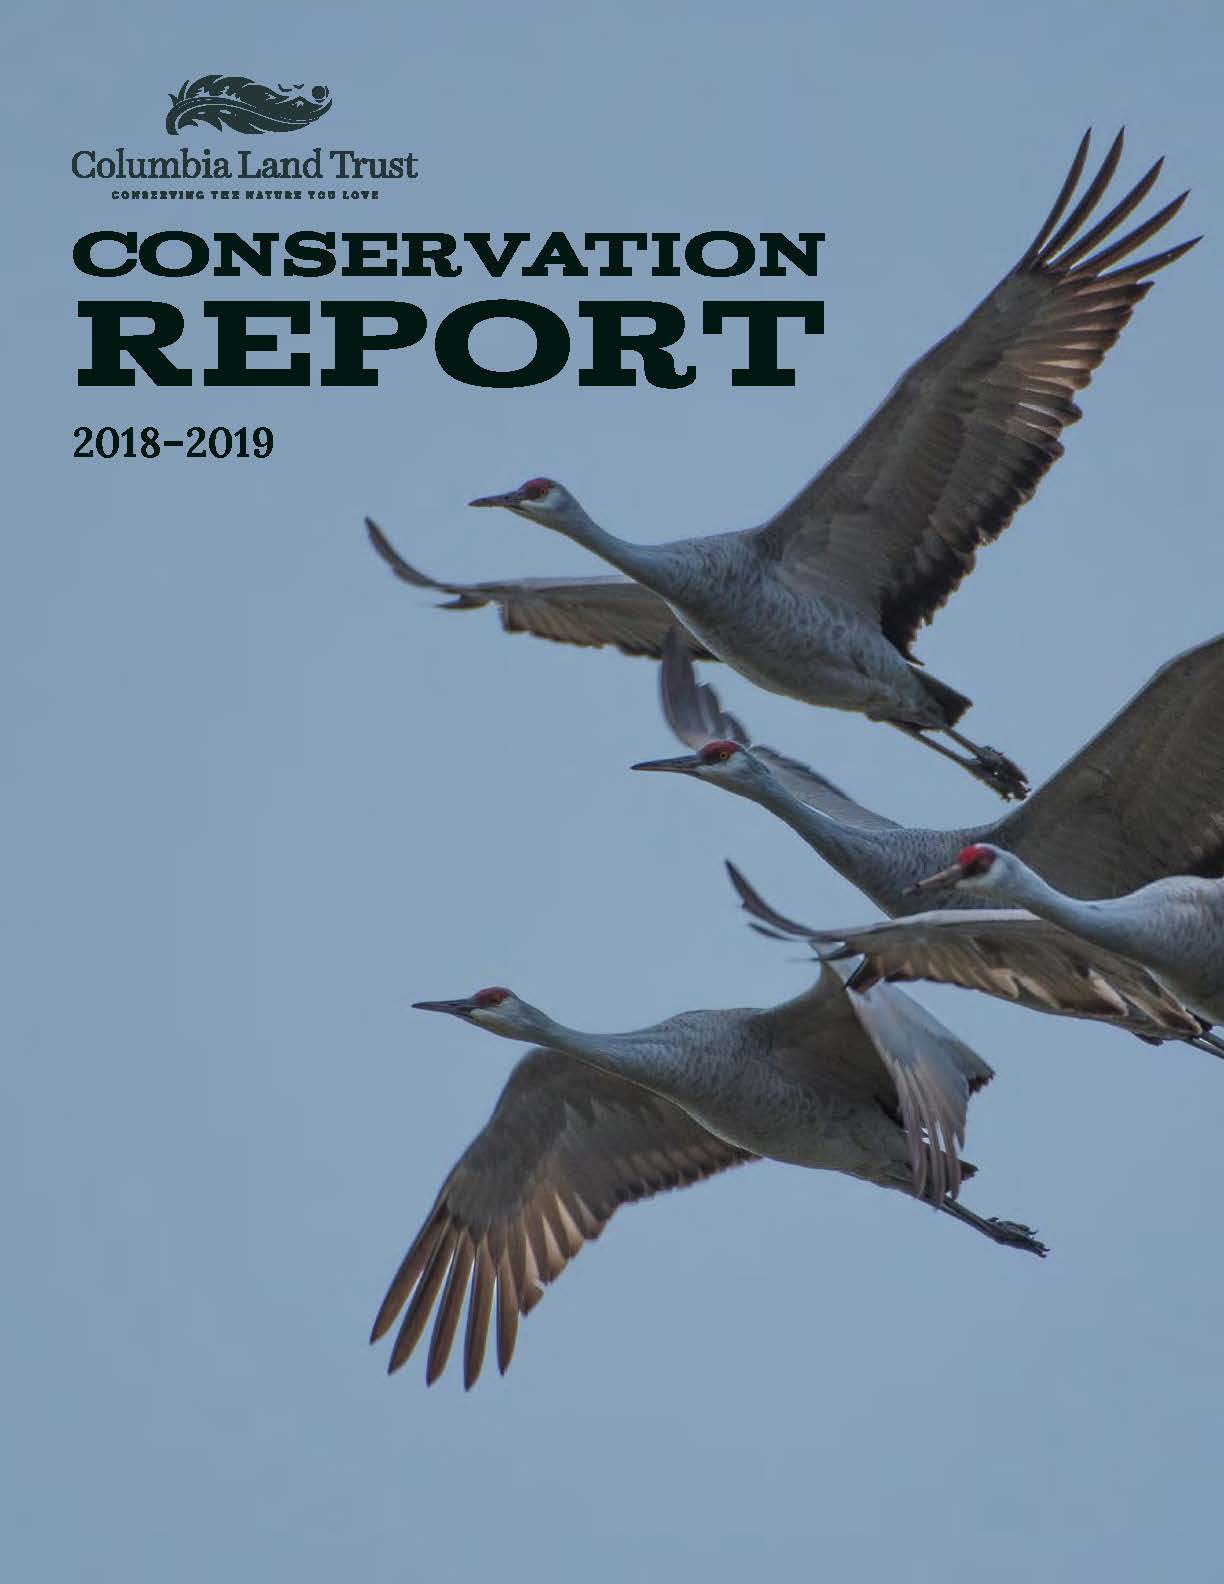 The cover of the 2018-2019 conservation report depicts four sandhill cranes in flight against a blue sky background